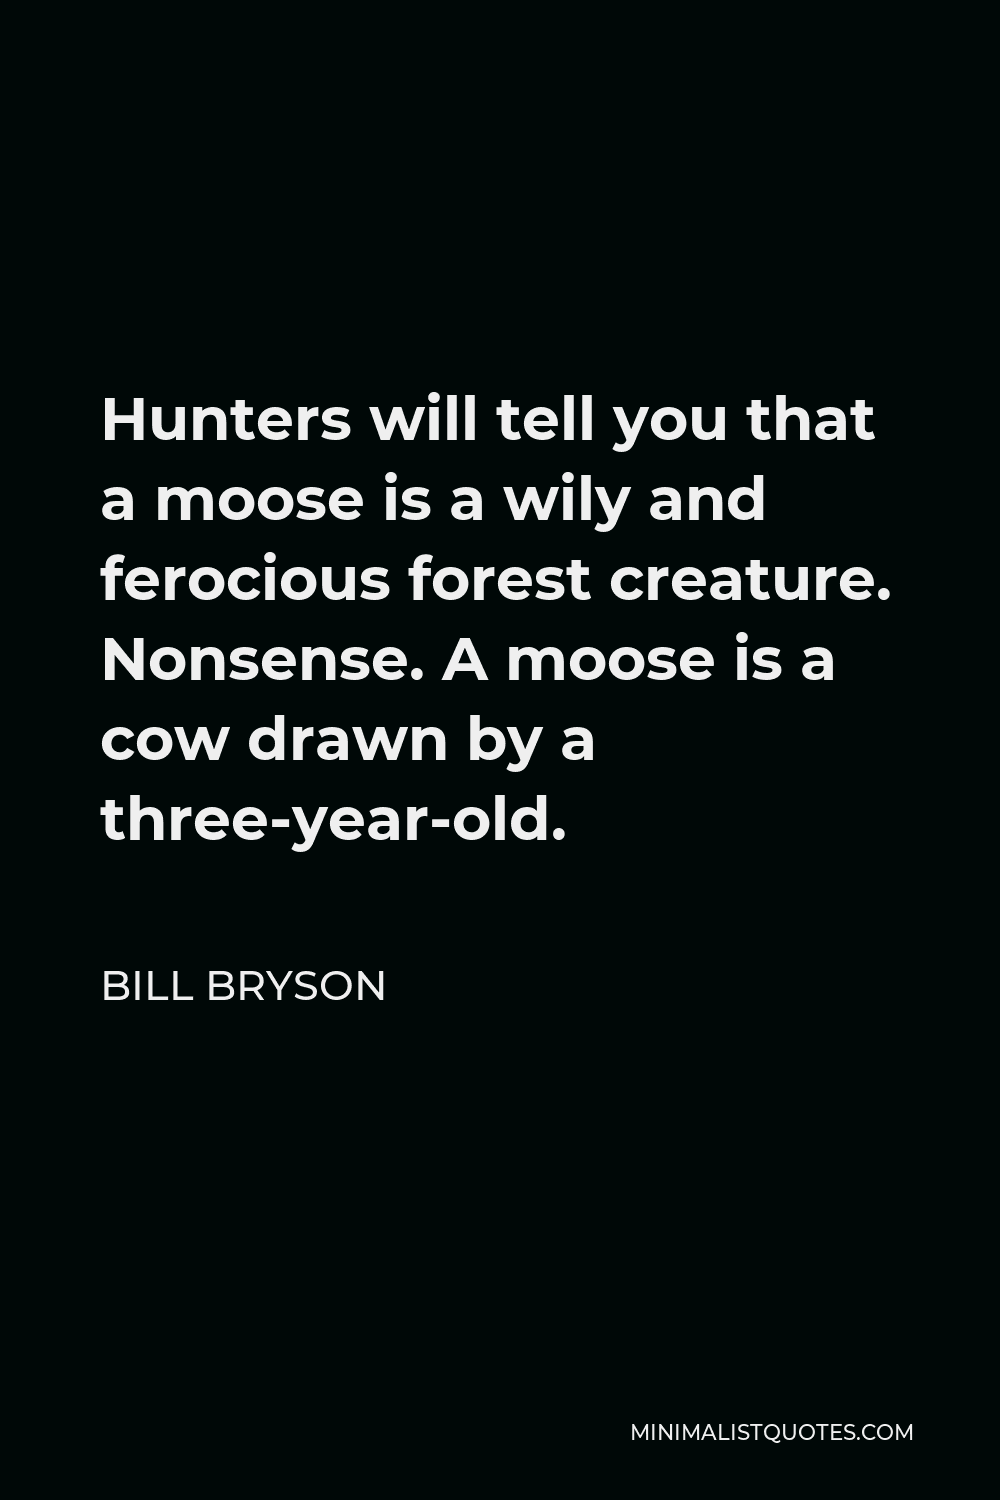 Bill Bryson Quote - Hunters will tell you that a moose is a wily and ferocious forest creature. Nonsense. A moose is a cow drawn by a three-year-old.